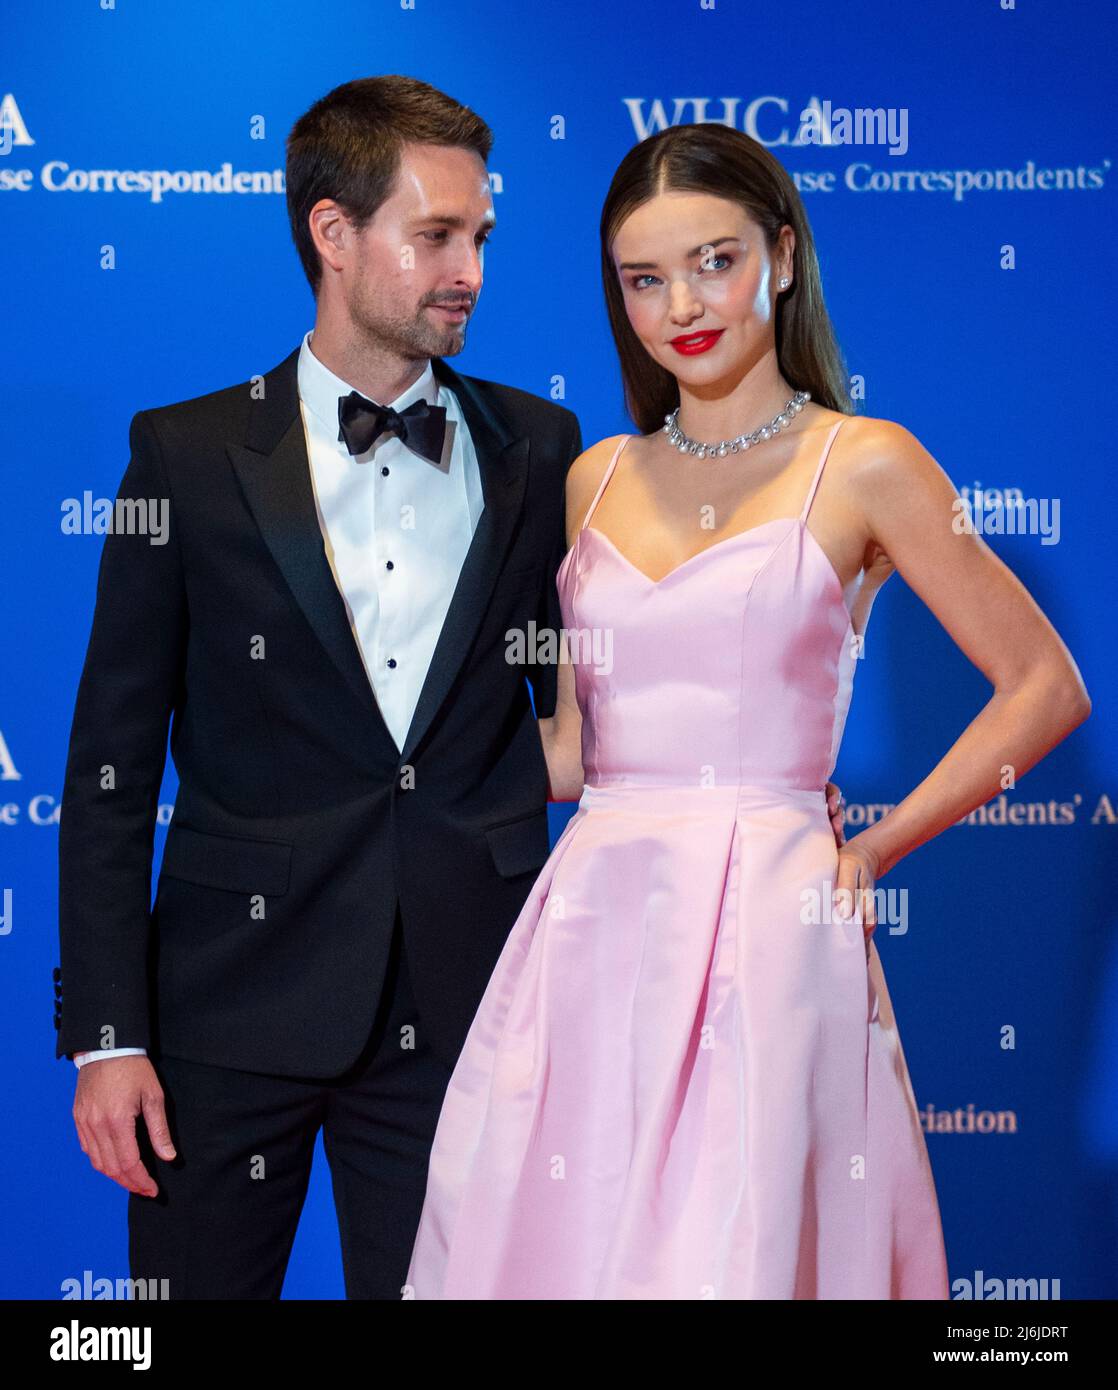 Evan Spiegel, left, and Miranda Kerr arrives for the 2022 White House  Correspondents Association Annual Dinner at the Washington Hilton Hotel on  Saturday, April 30, 2022. This is the first time since